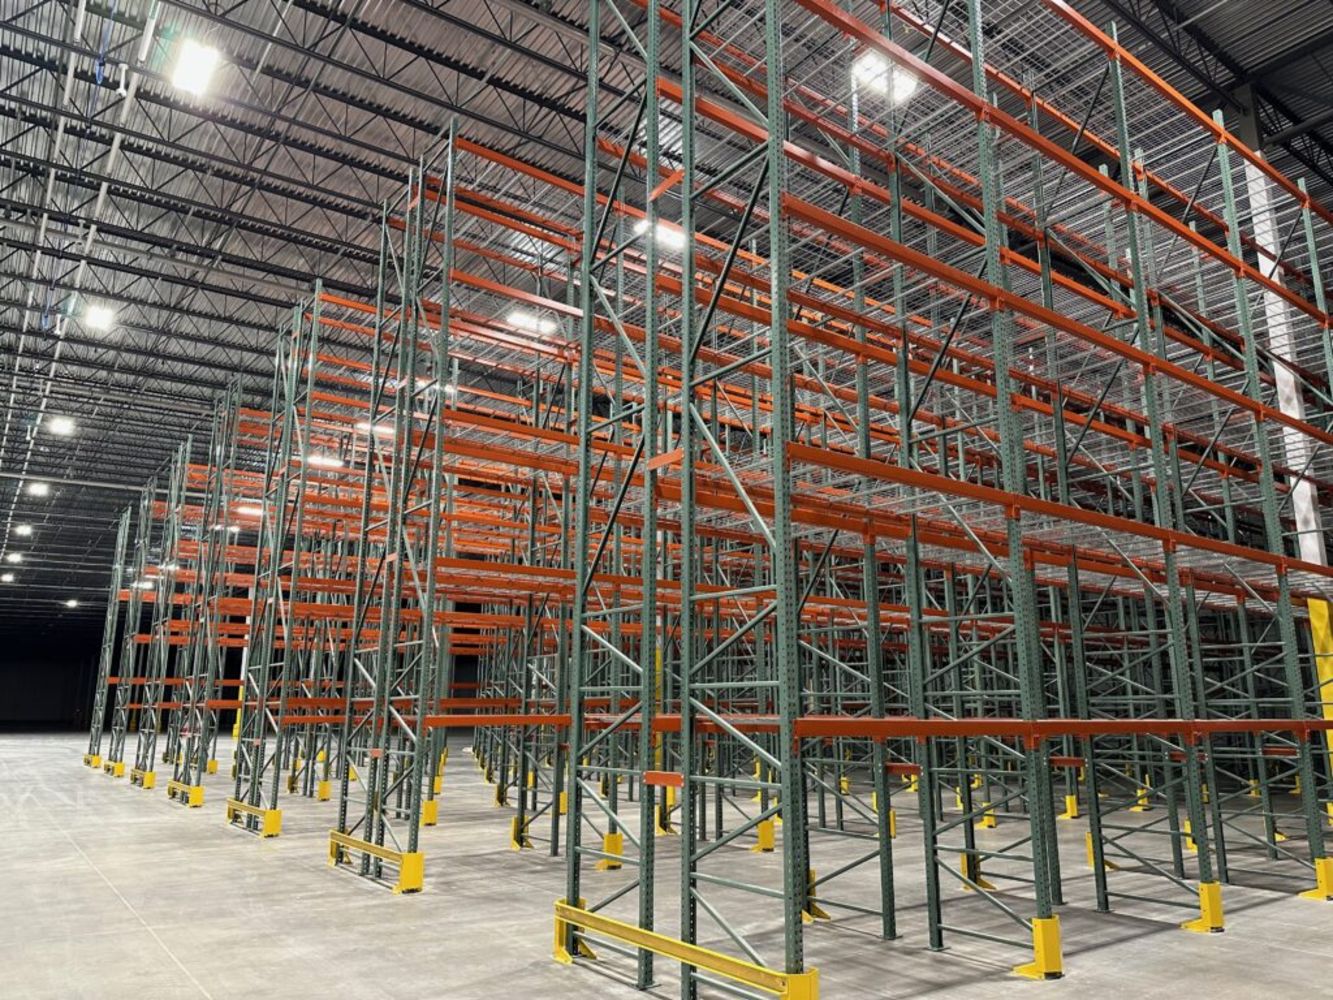 2021 Pallet Rack Auction Grocery Dist Center Equipment (Newly Installed 2021) Large Qty Teardrop Pallet Racking Uprights, Load Beams, Wire Deck